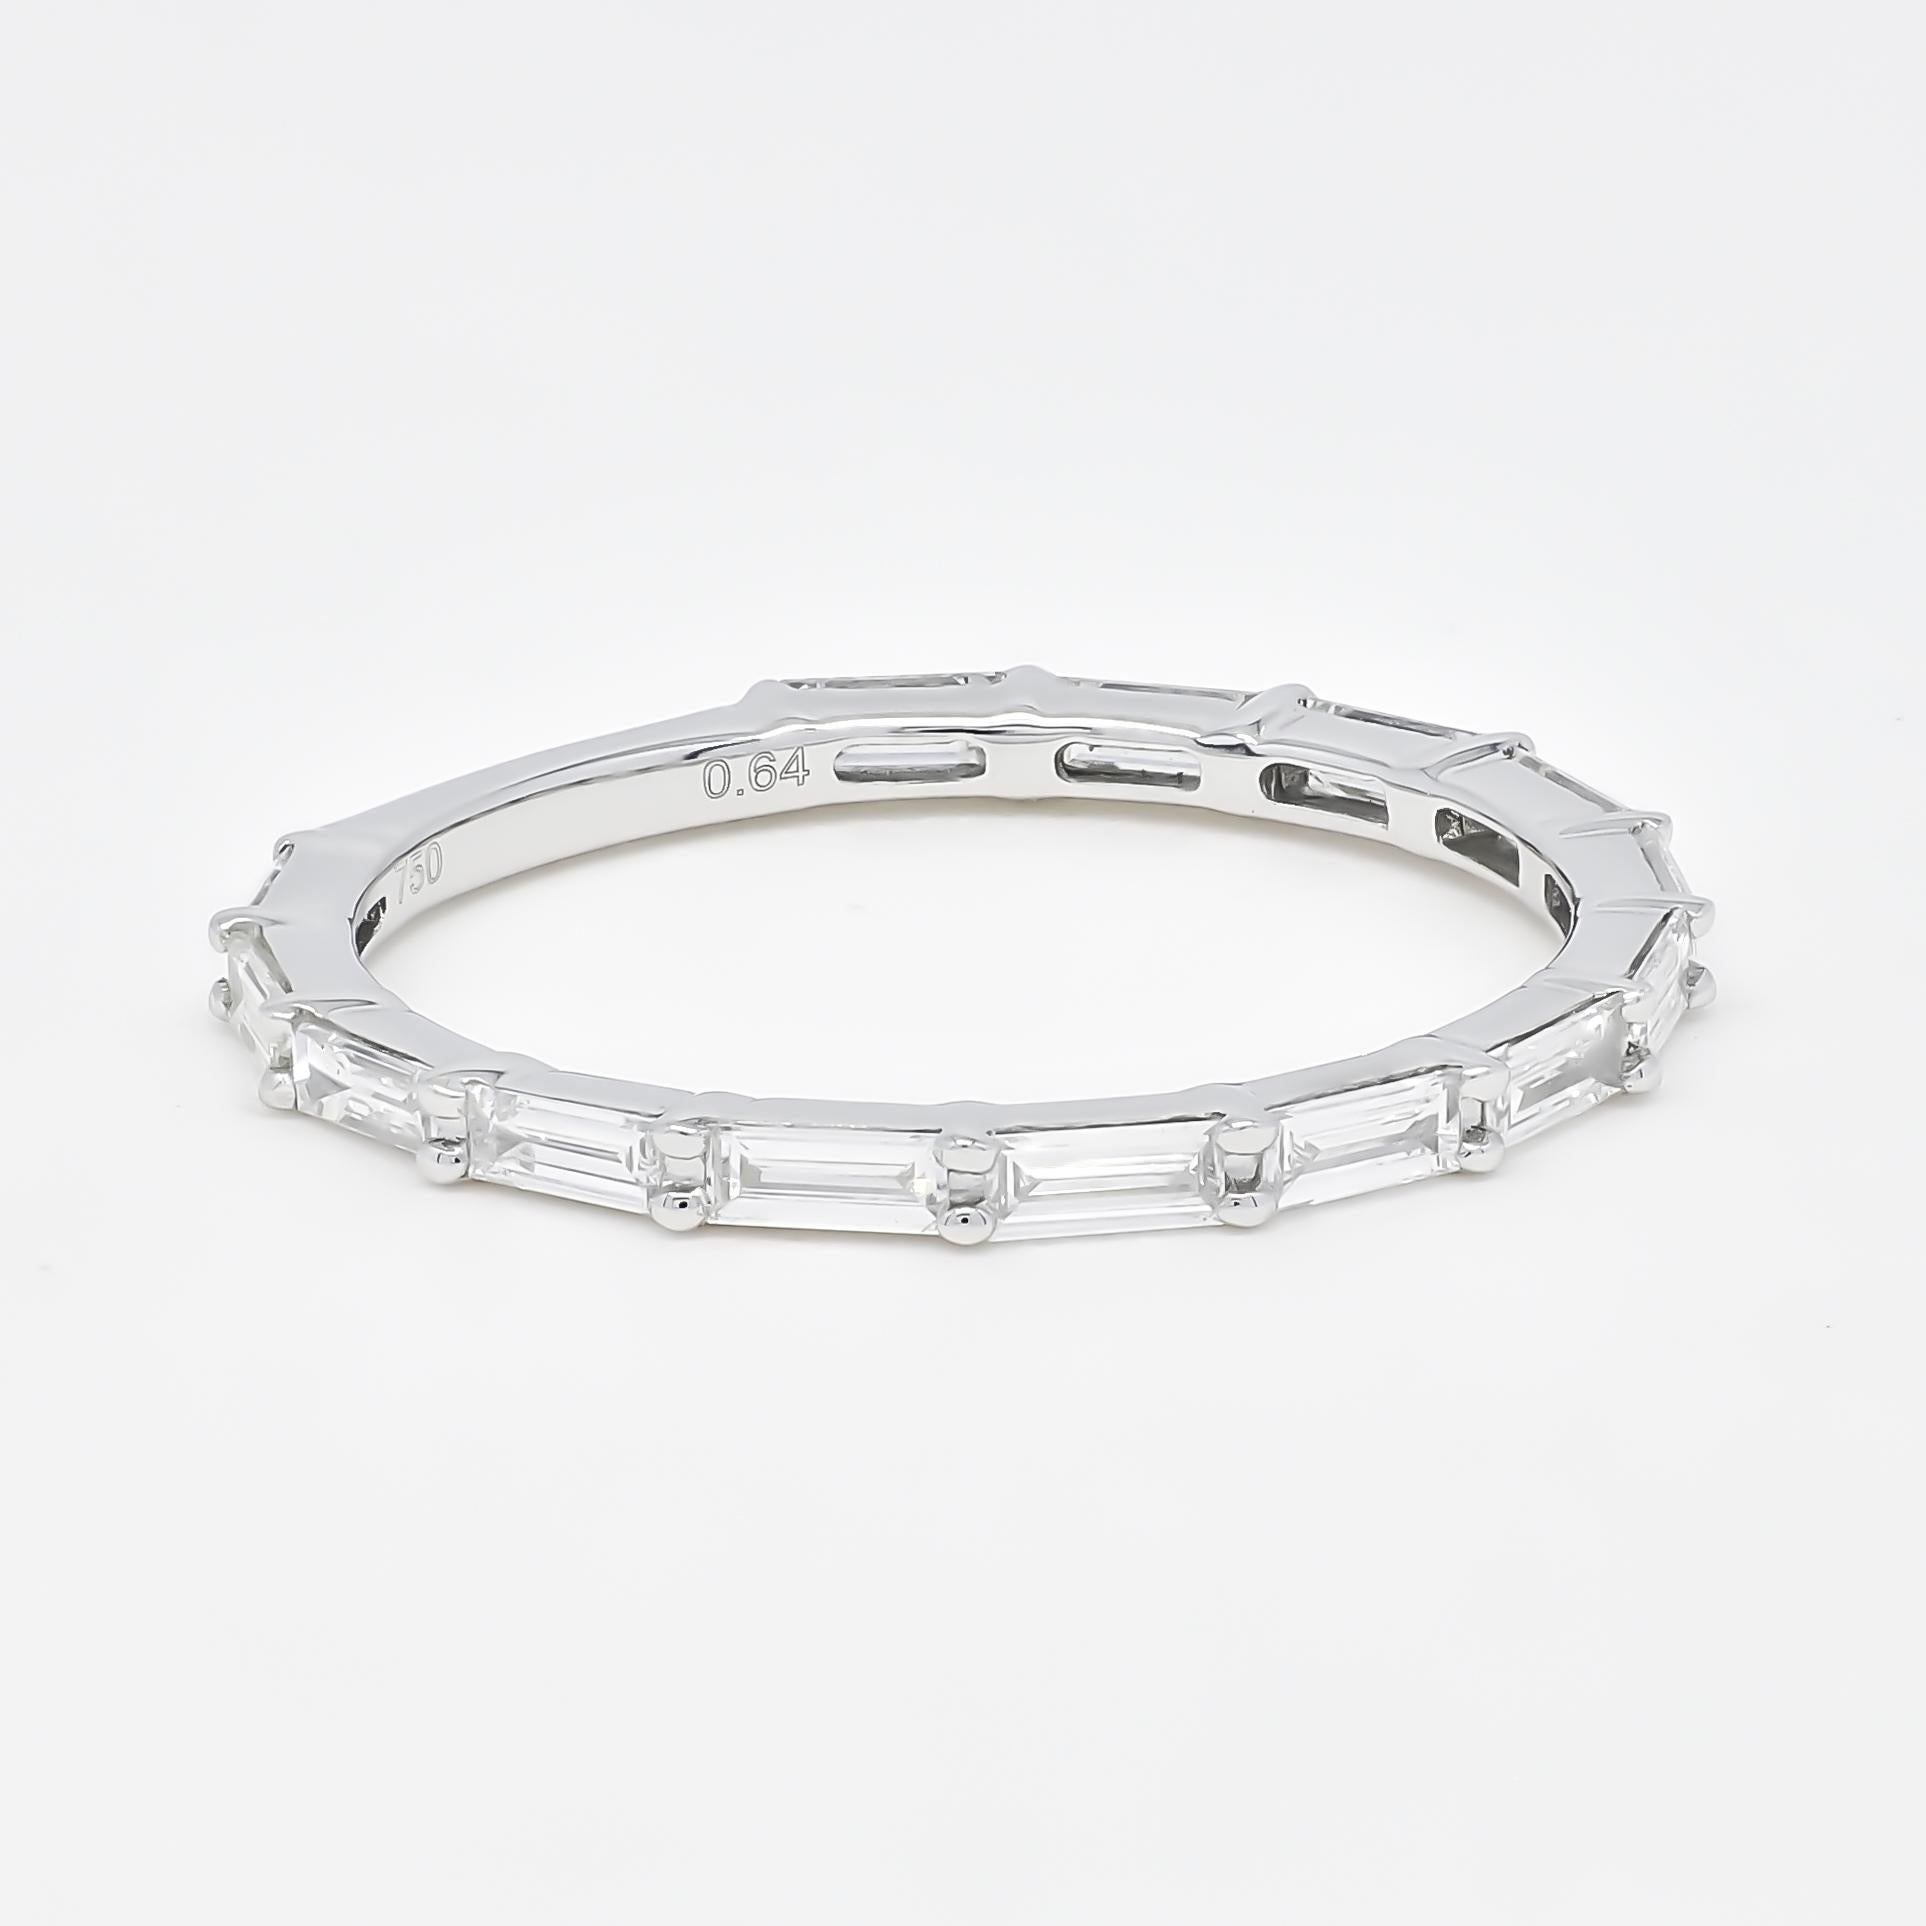 Dramatically different. Make this diamond ring your signature piece with its gorgeous Prong-set baguettes in a diagonal white/Yellow gold design. Exquisite in both quality and design, this  stunning full eternity band celebrates the story of you.